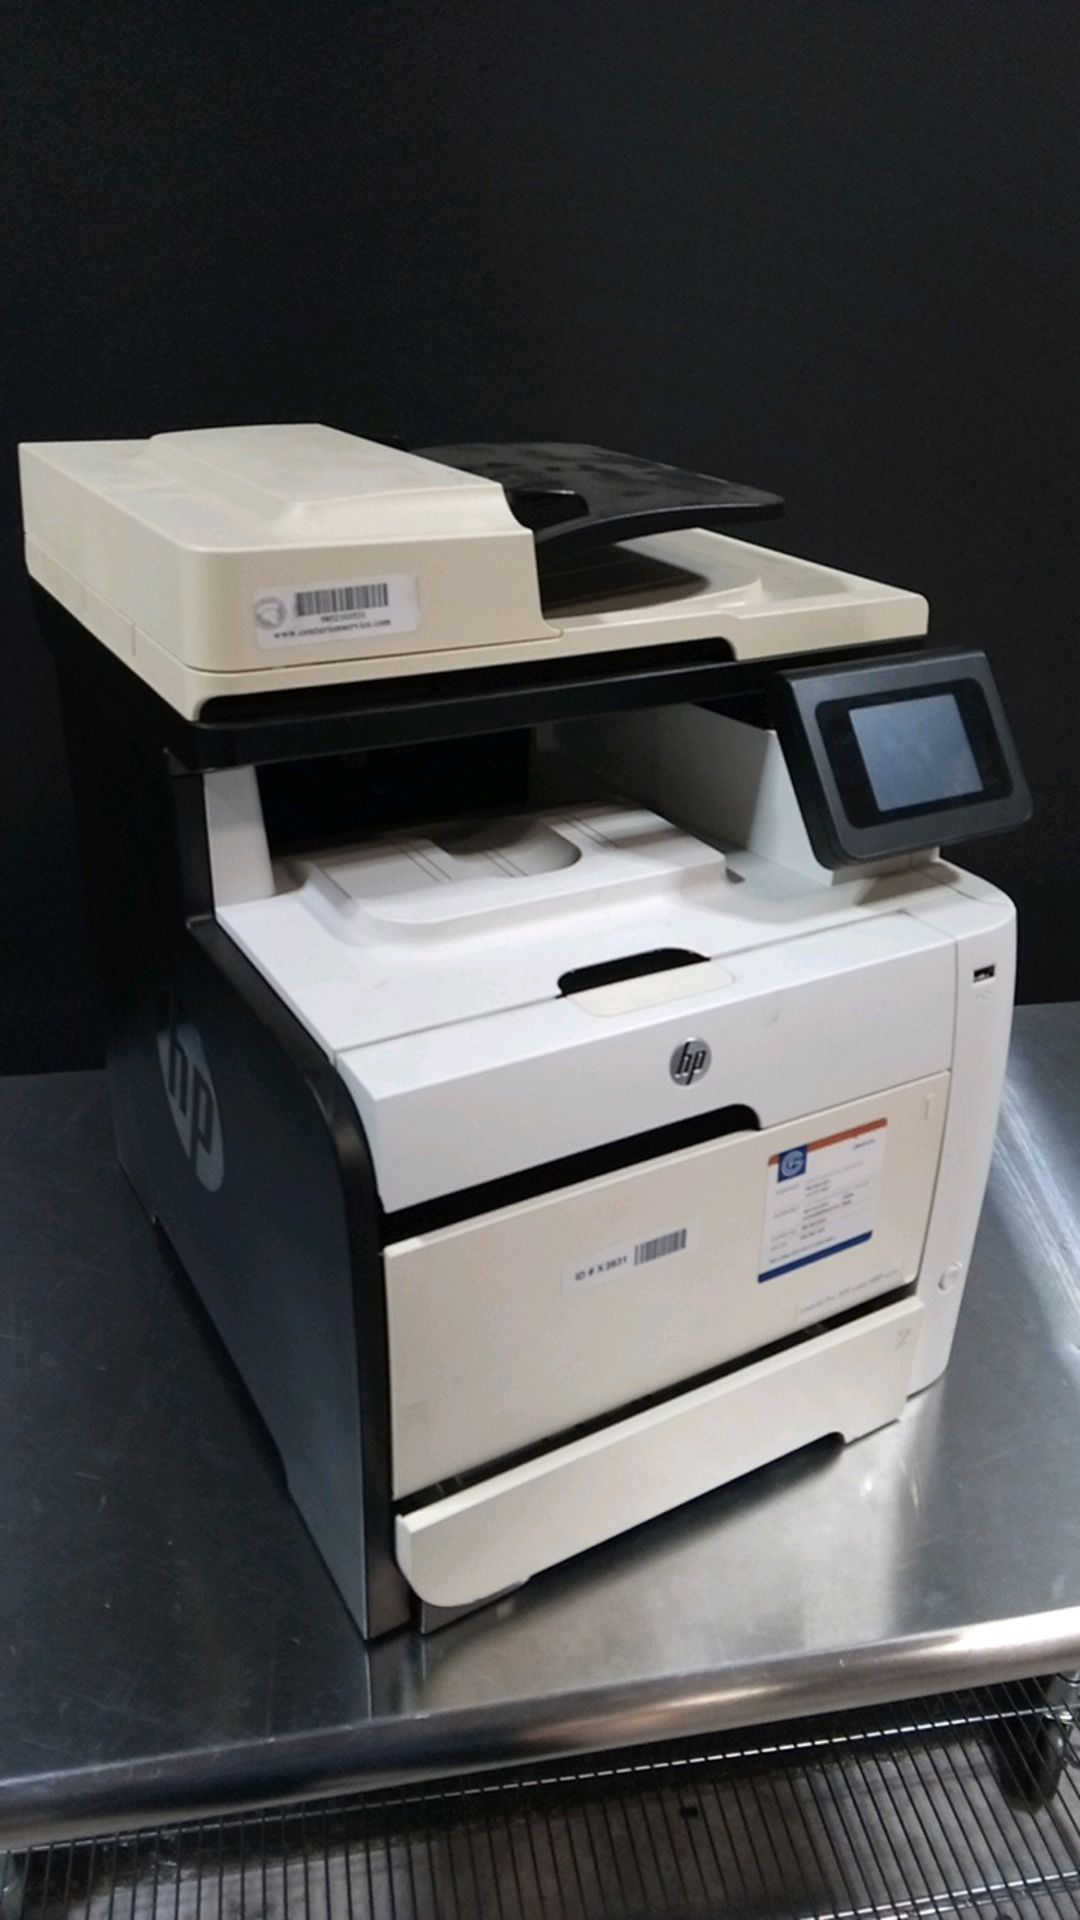 HP M375NW PRINTER LOCATED AT: 2440 GREENLEAF AVE, ELK GROVE VILLAGE IL